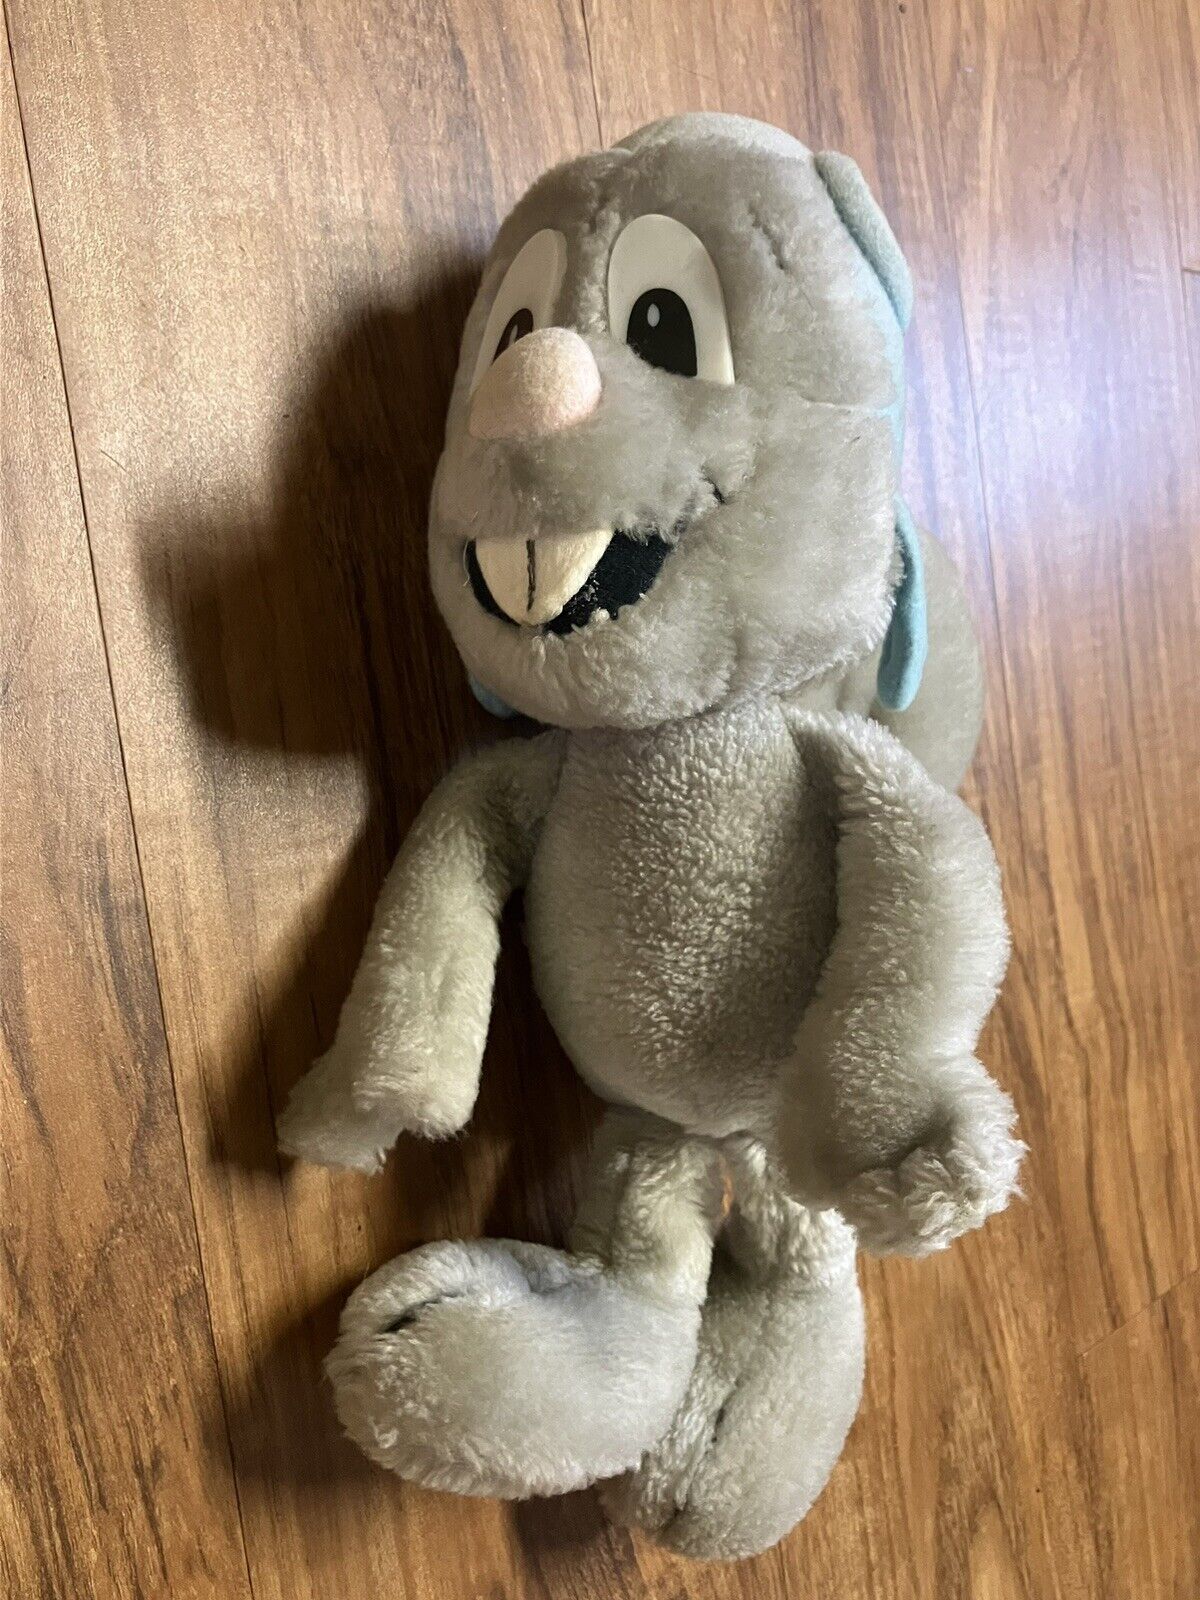 VINTAGE ROCKY STUFFED TOY - 1982 - WALLACE BERRIE COLLECTION USED CONDITION RARE